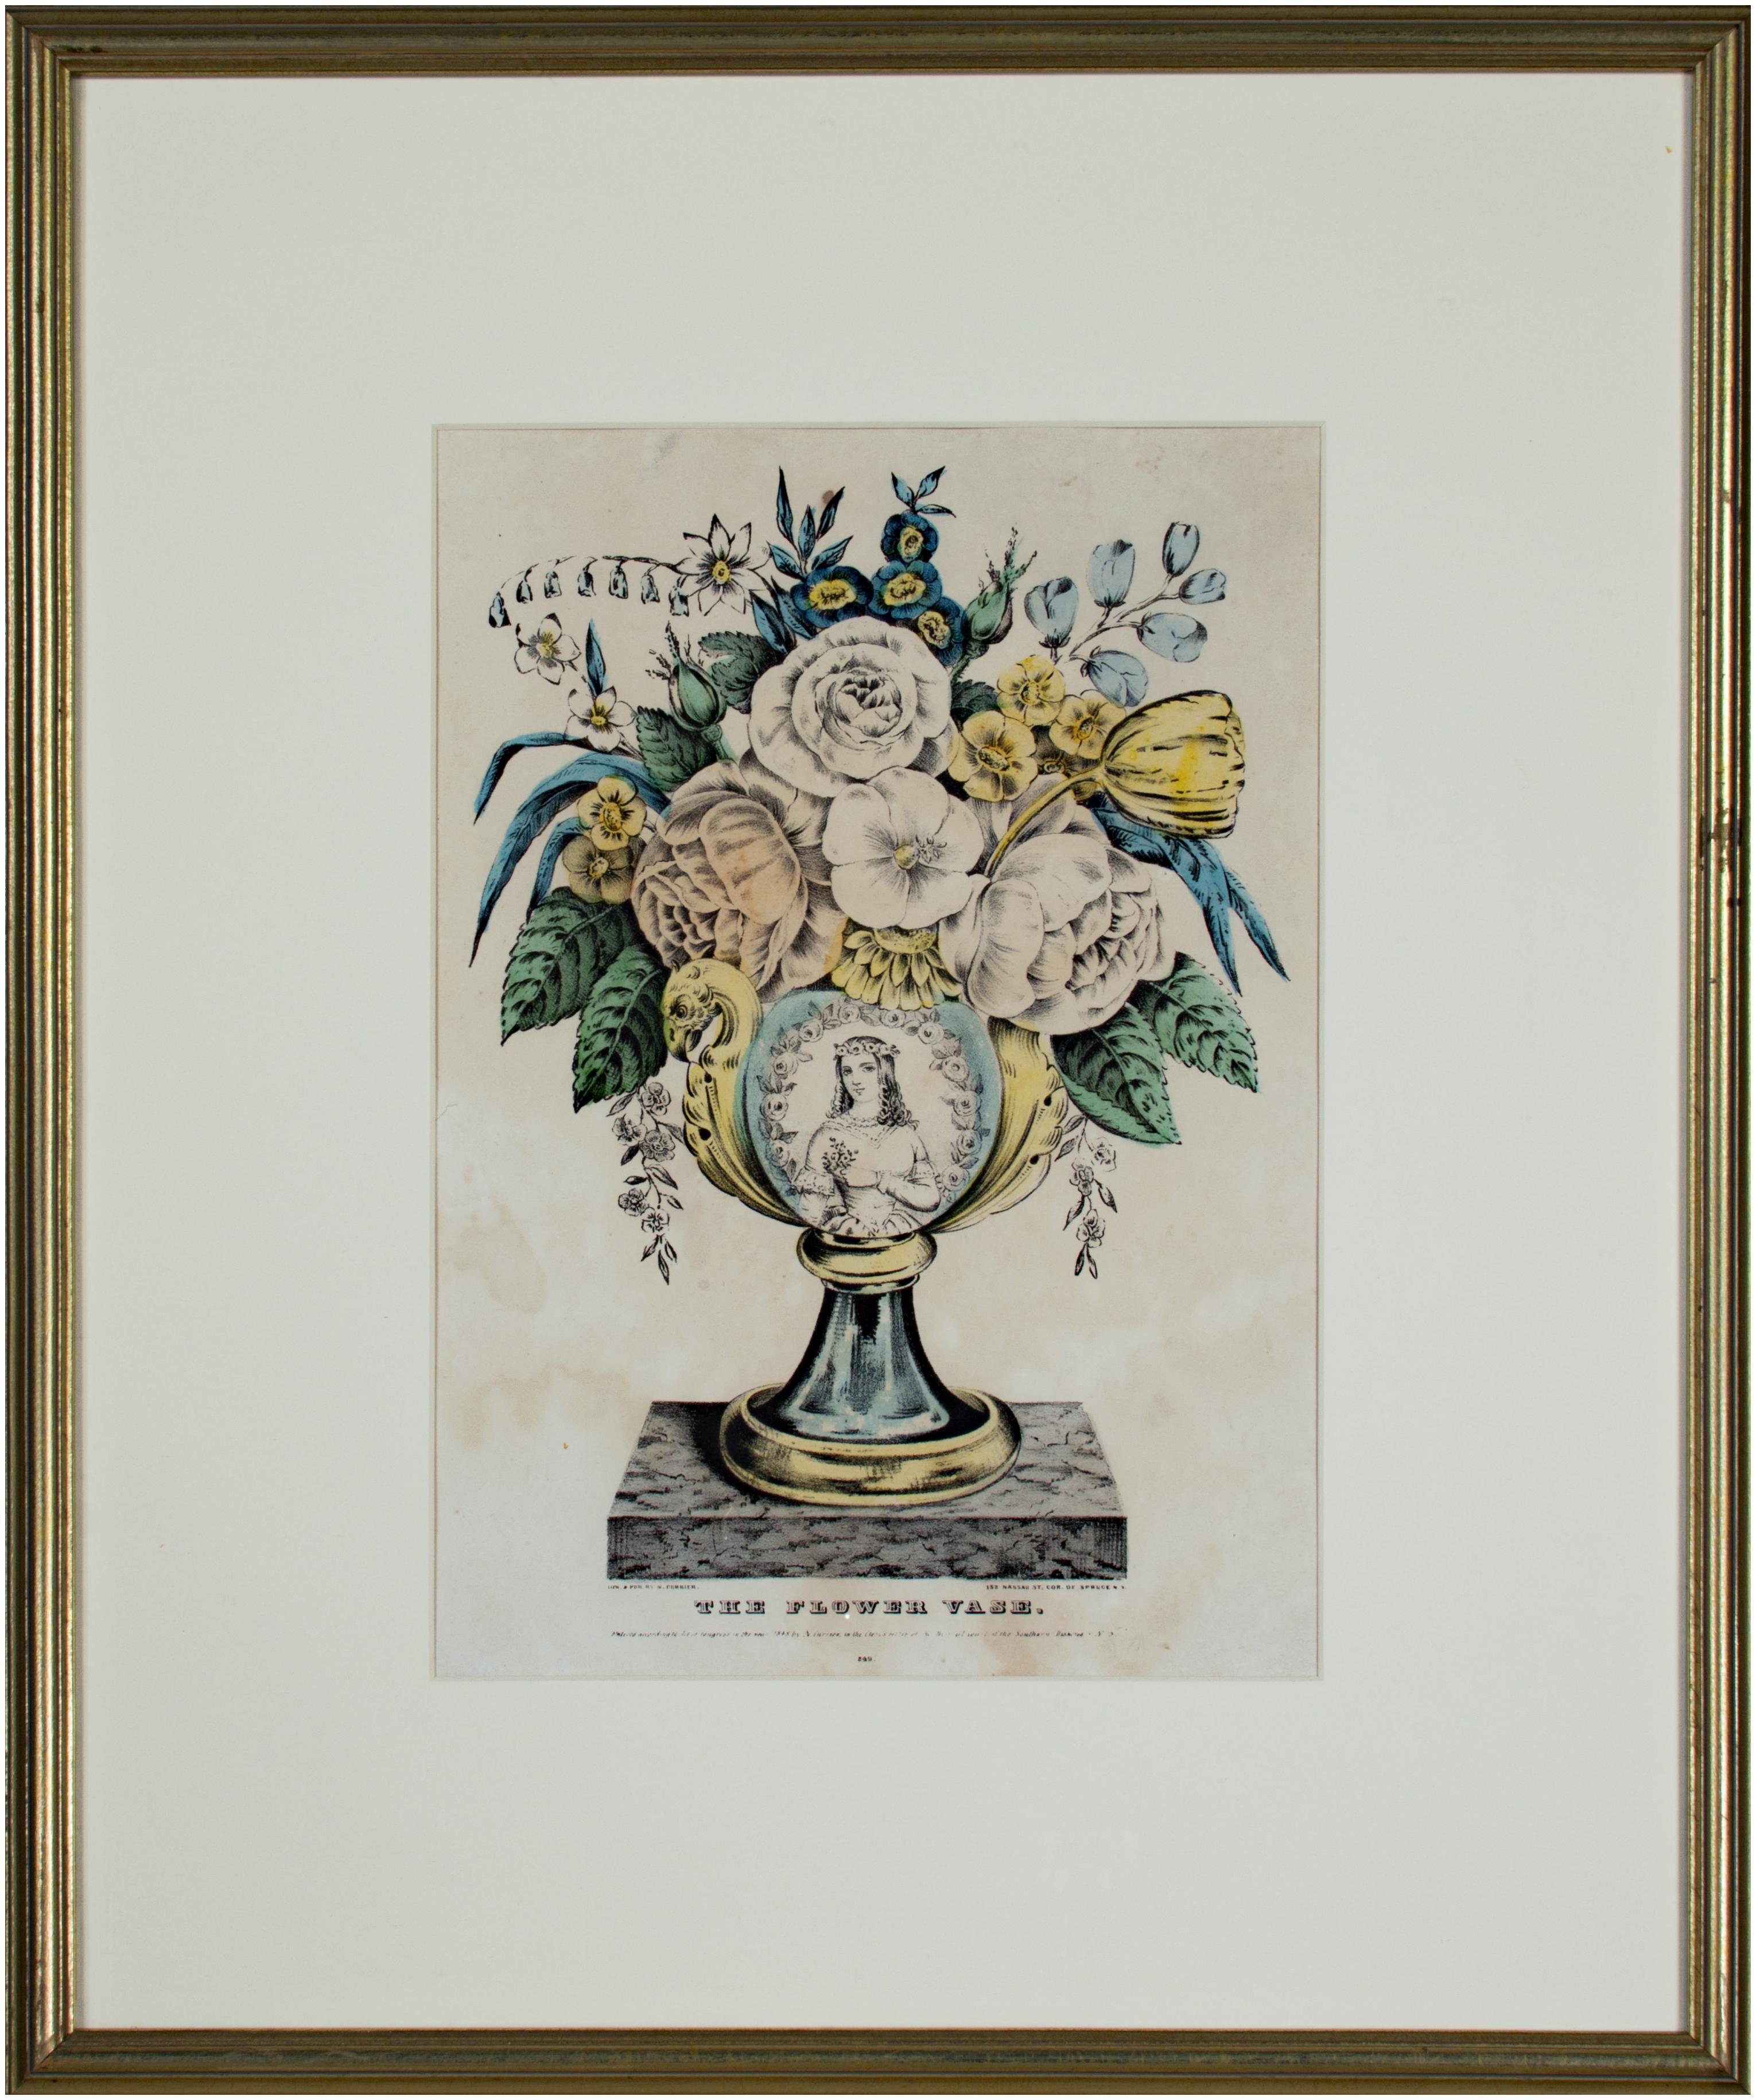 'The Flower Vase' original hand-colored lithograph by Nathaniel Currier